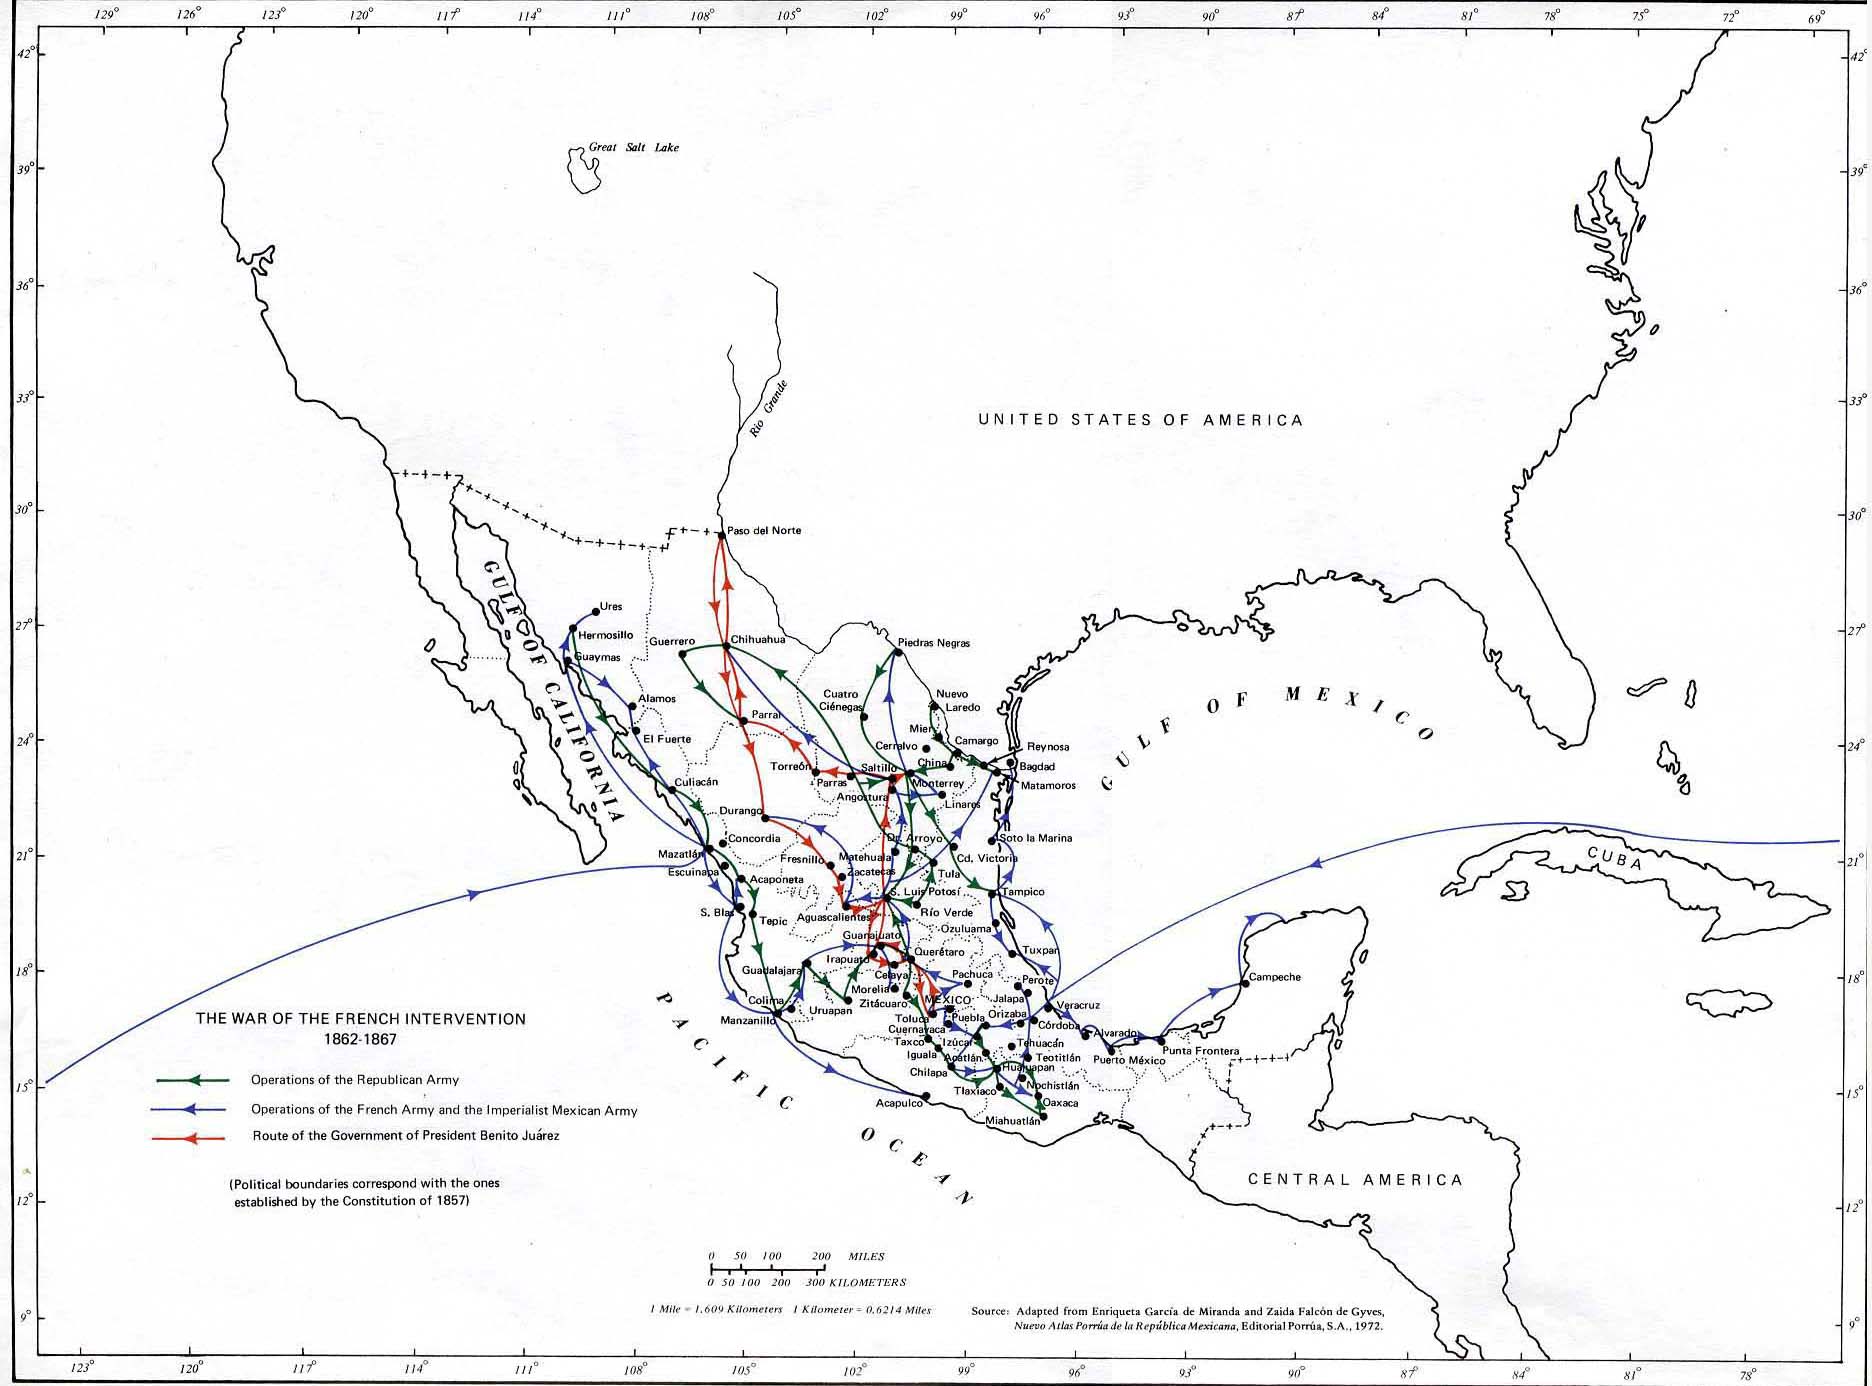 Mexico - The War of the French Intervention, 1862-1867